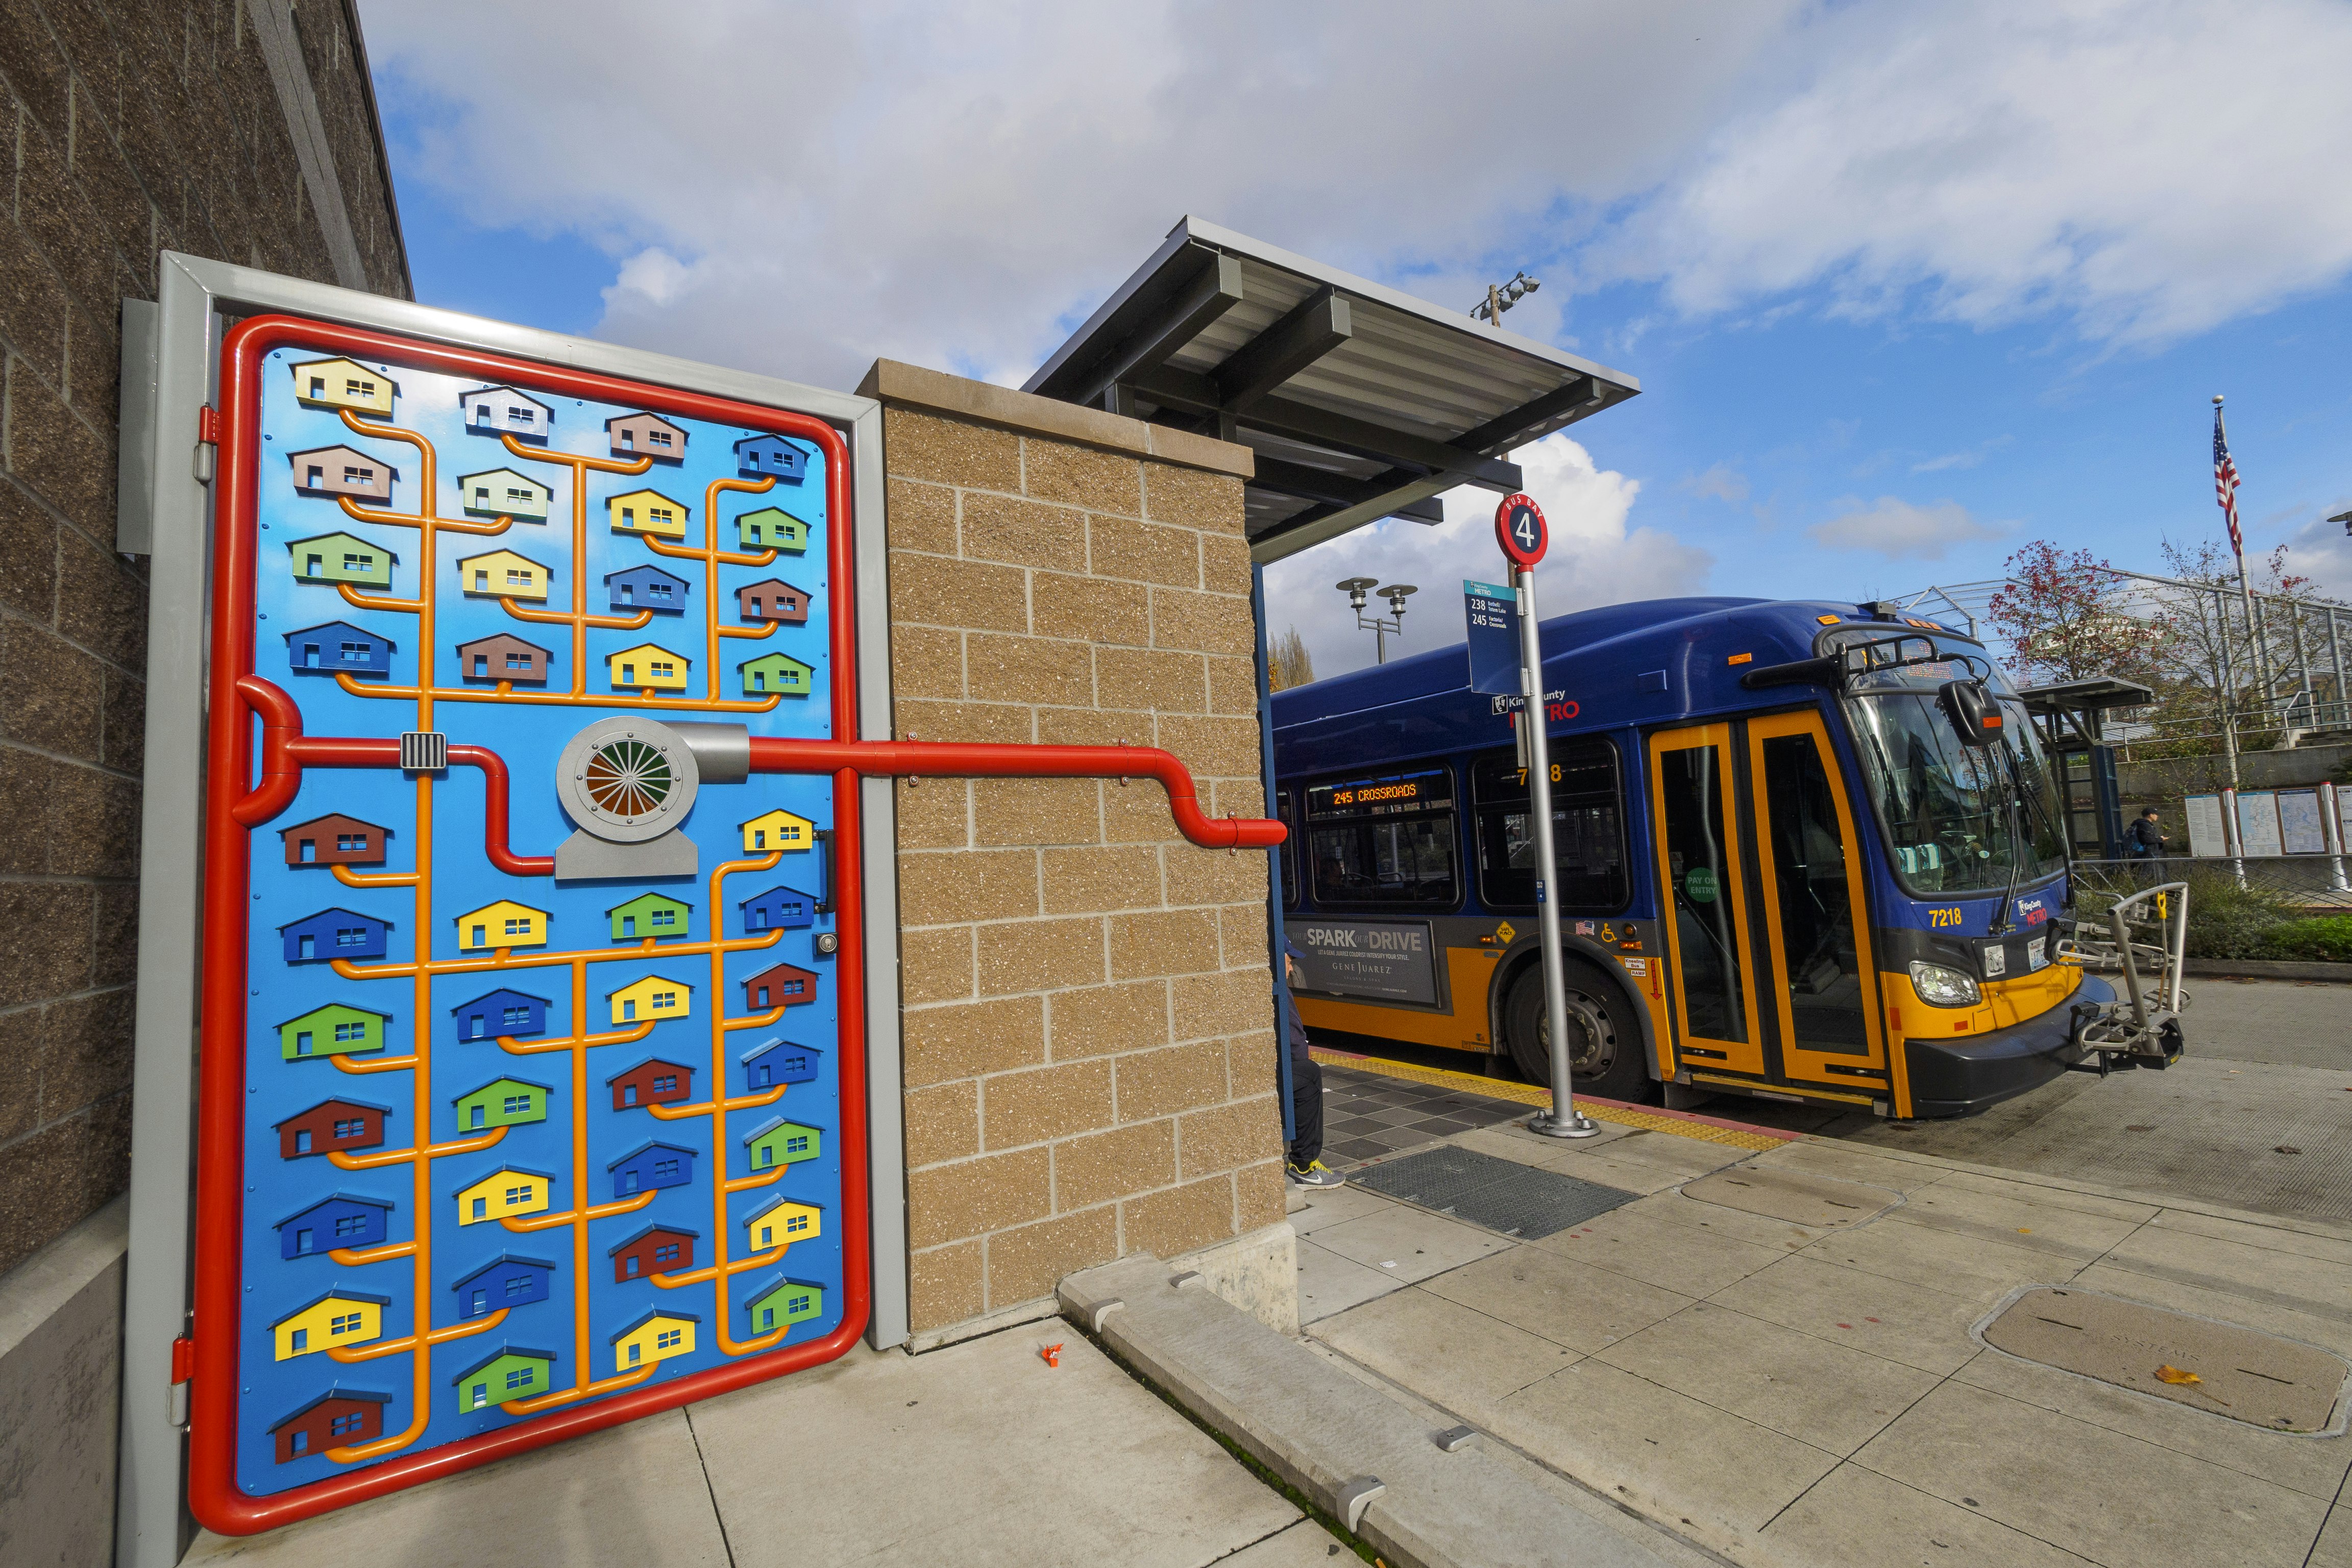 A gate made out of red metal piping and colorful metal depicts four columns with eleven rows of styled houses in primary colors, all connected by orange plumbing. This piece of public art in Kirkland, Washington adorns the Pump Station Gates. A bus stop for the number 4 line sits in the background, with a blue and orange bus stopped by a beige sidewalk